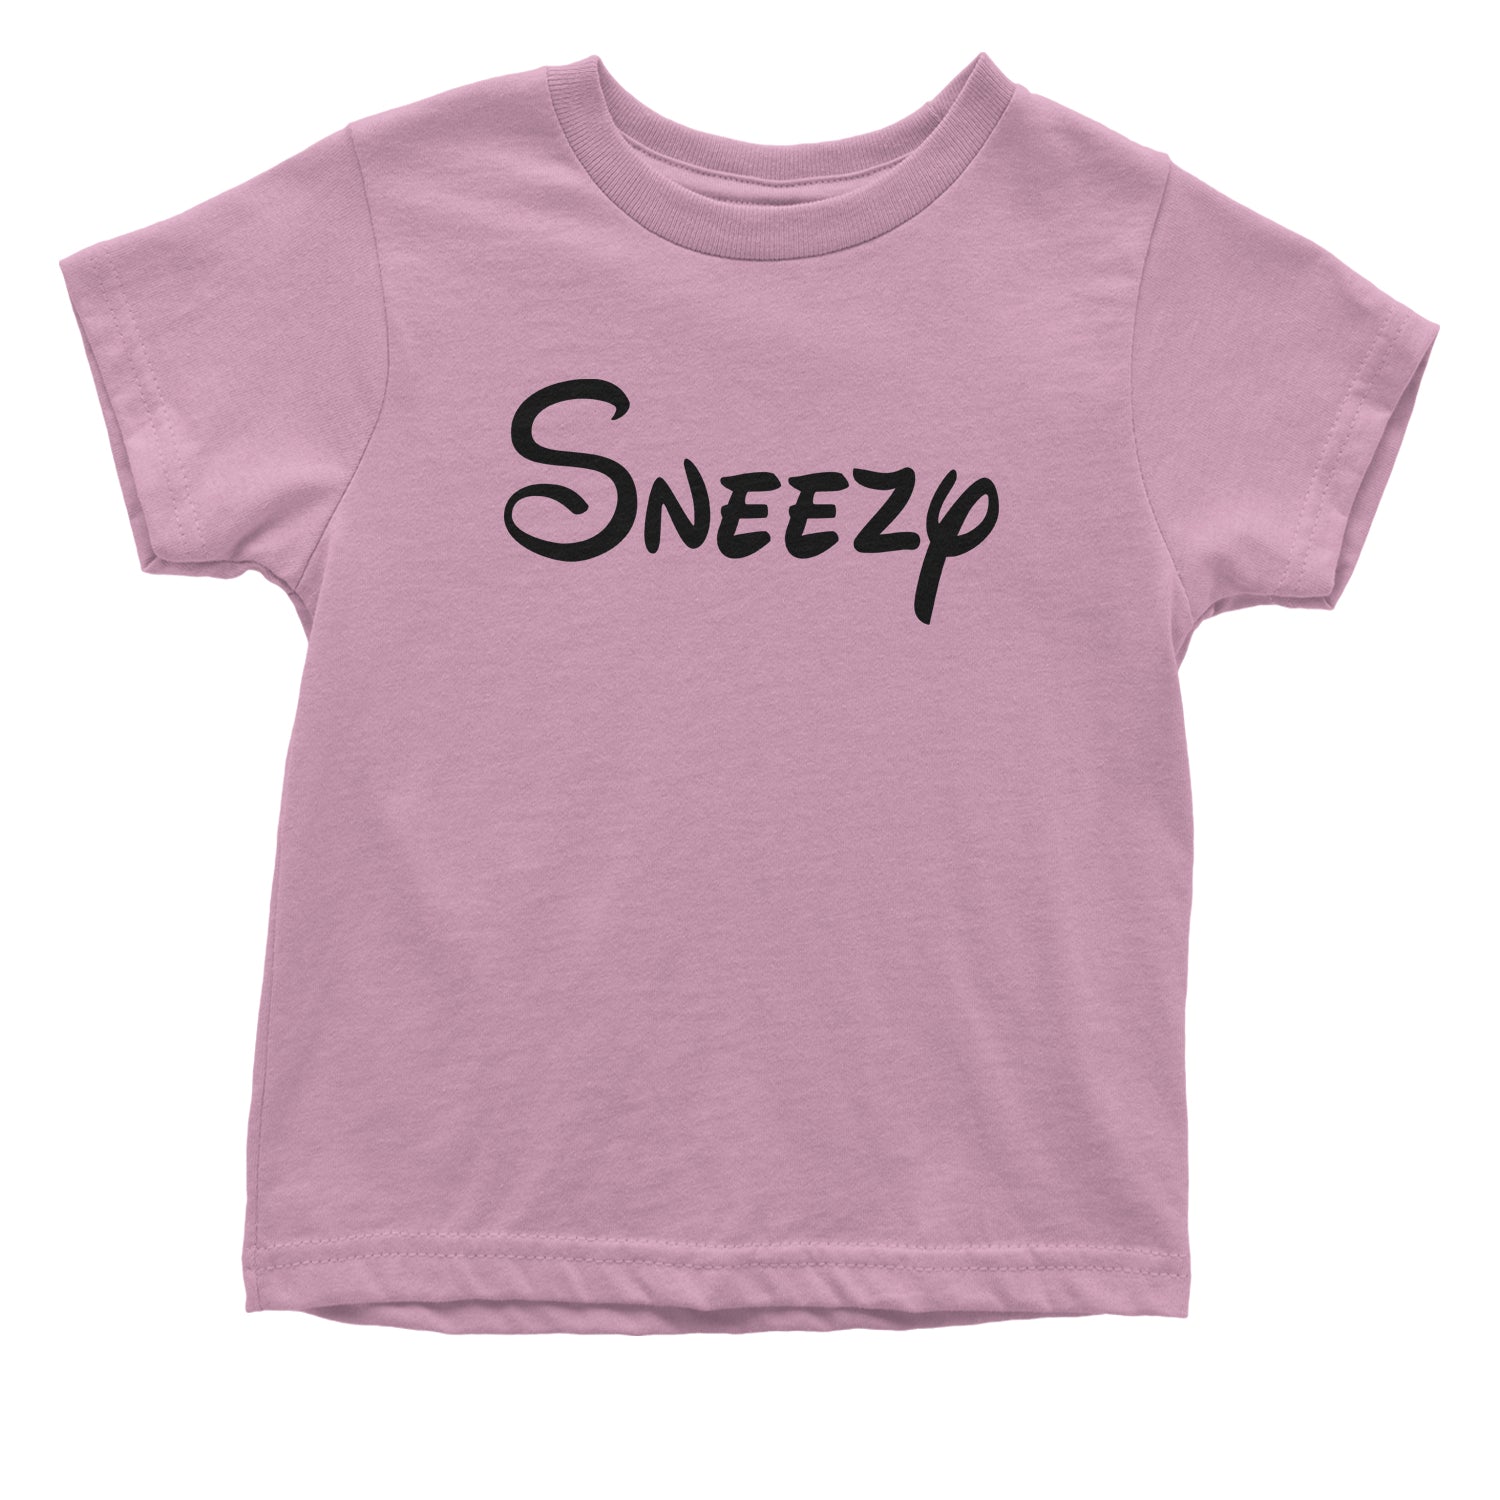 Sneezy - 7 Dwarfs Costume Toddler T-Shirt and, costume, dwarfs, group, halloween, matching, seven, snow, the, white by Expression Tees